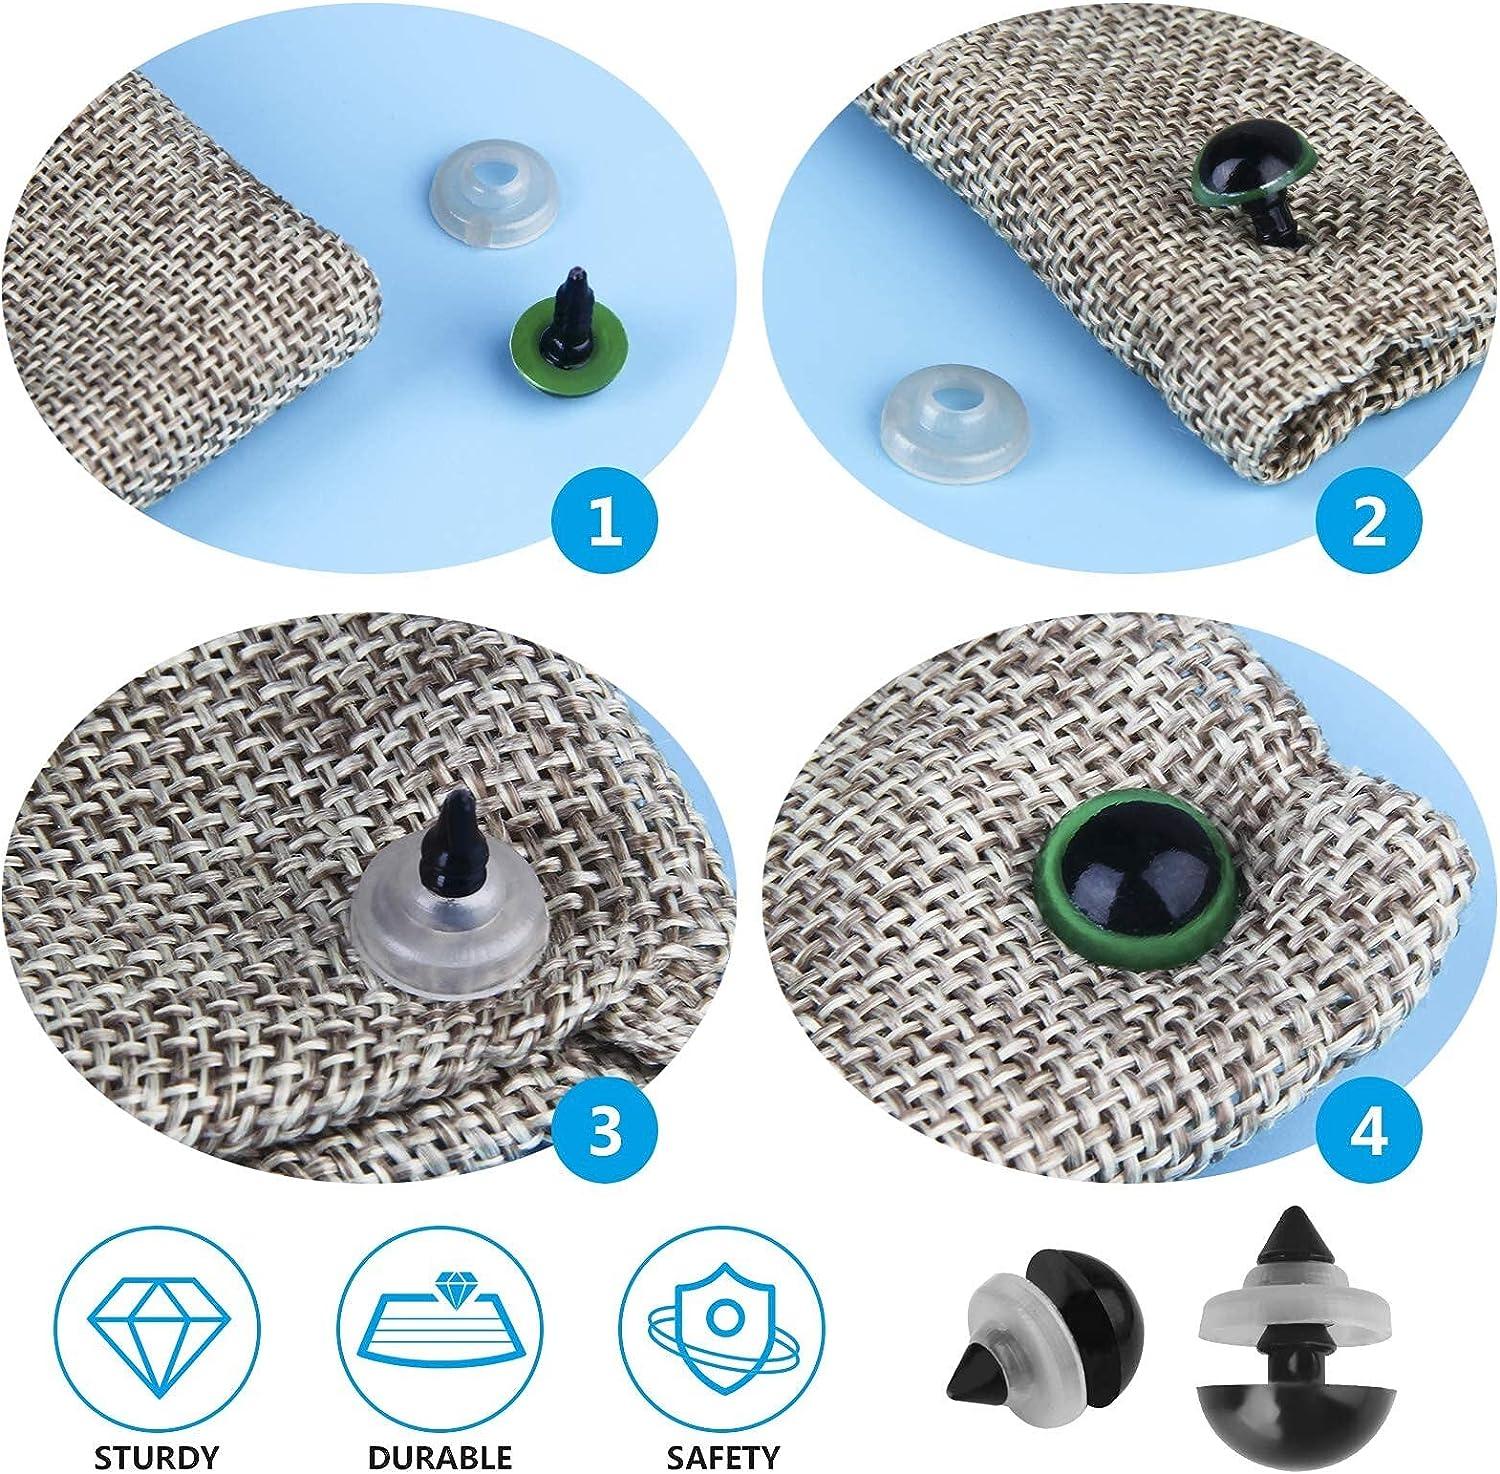 600pcs Plastic Safety Eyes And Noses - Craft Accessories For Amigurumi,  Crochet, Dolls, Stuffed Animals, And Teddy Bears